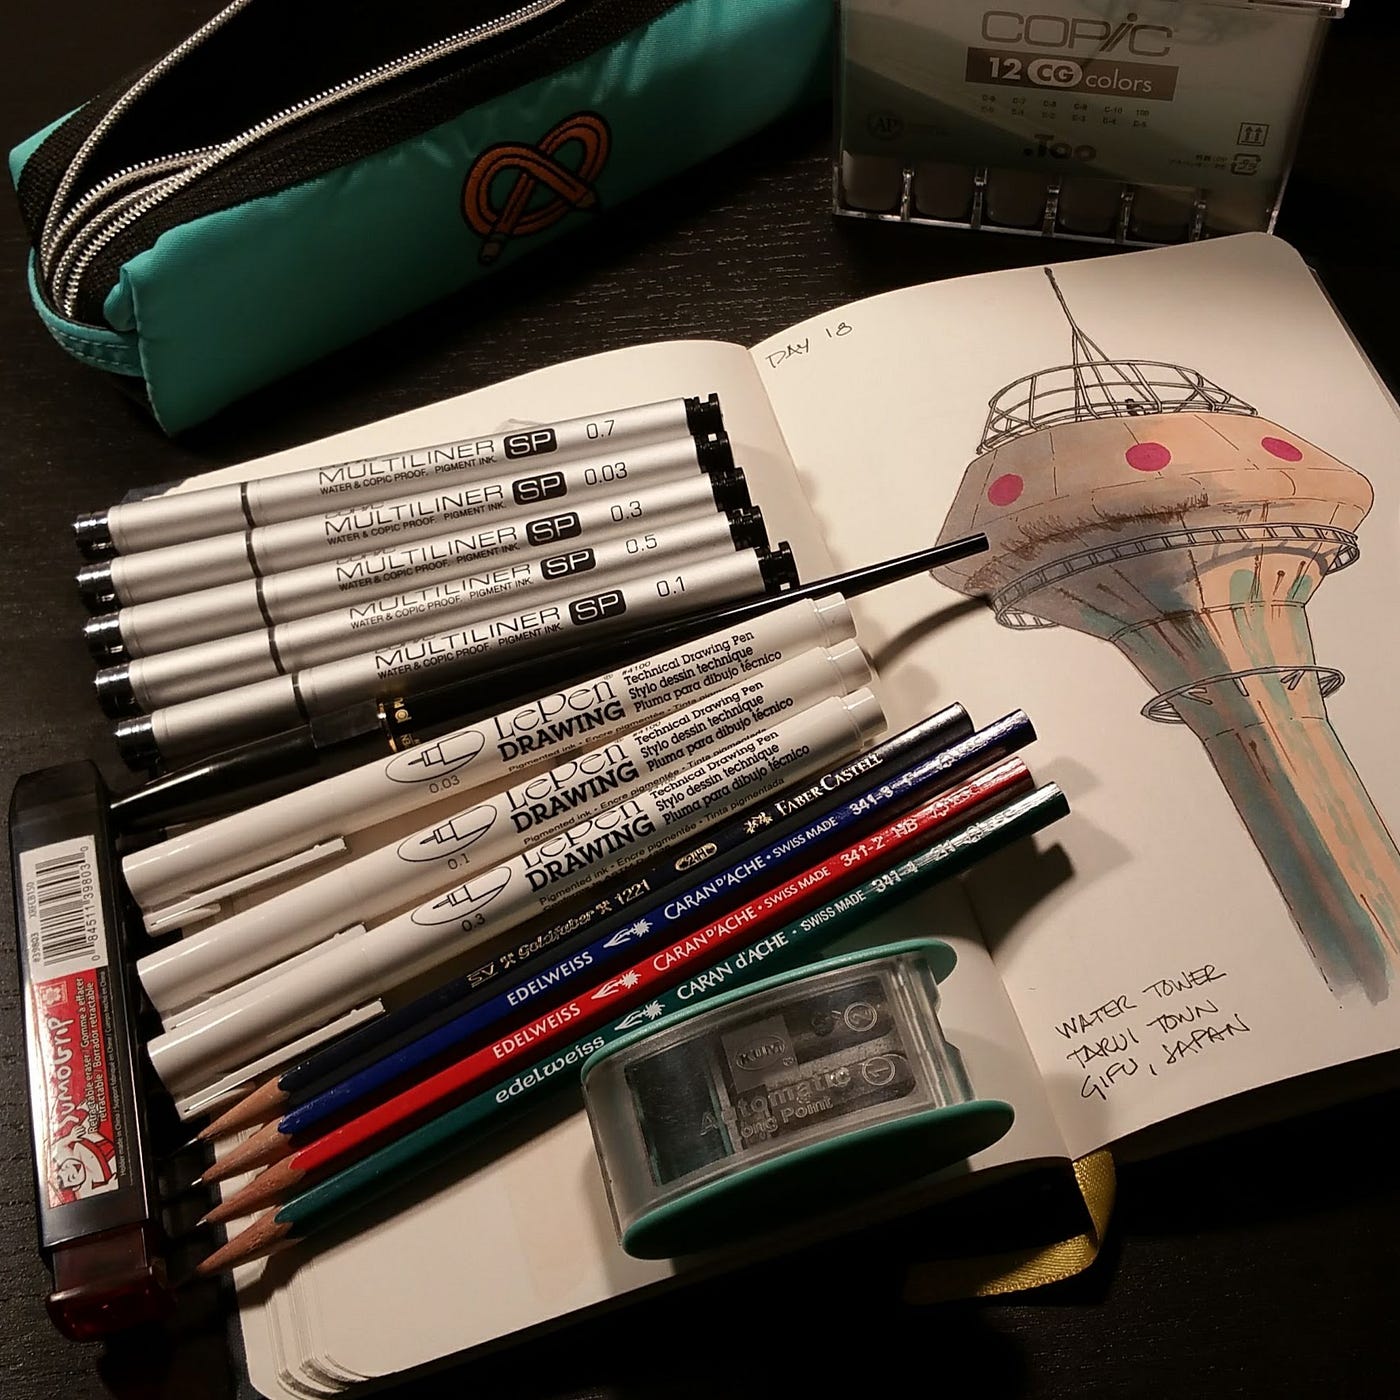 Prep for Inktober with PIN fine line pens - uni-ball